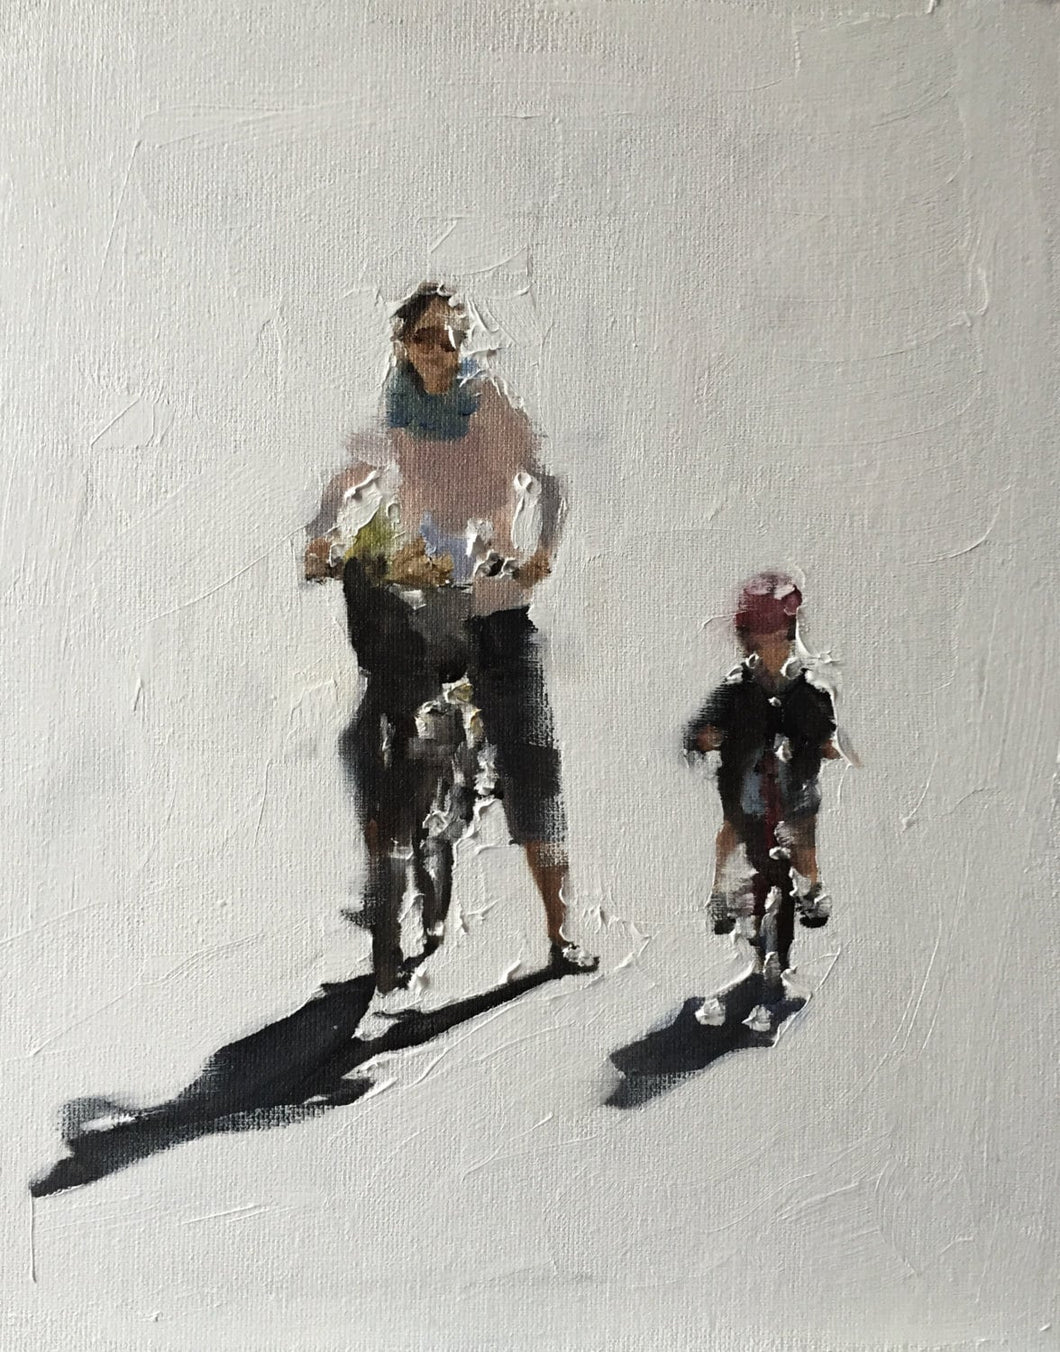 Family Bike Ride Painting, Prints, Canvas, Posters, Originals, Commissions, Fine Art - from original oil painting by James Coates